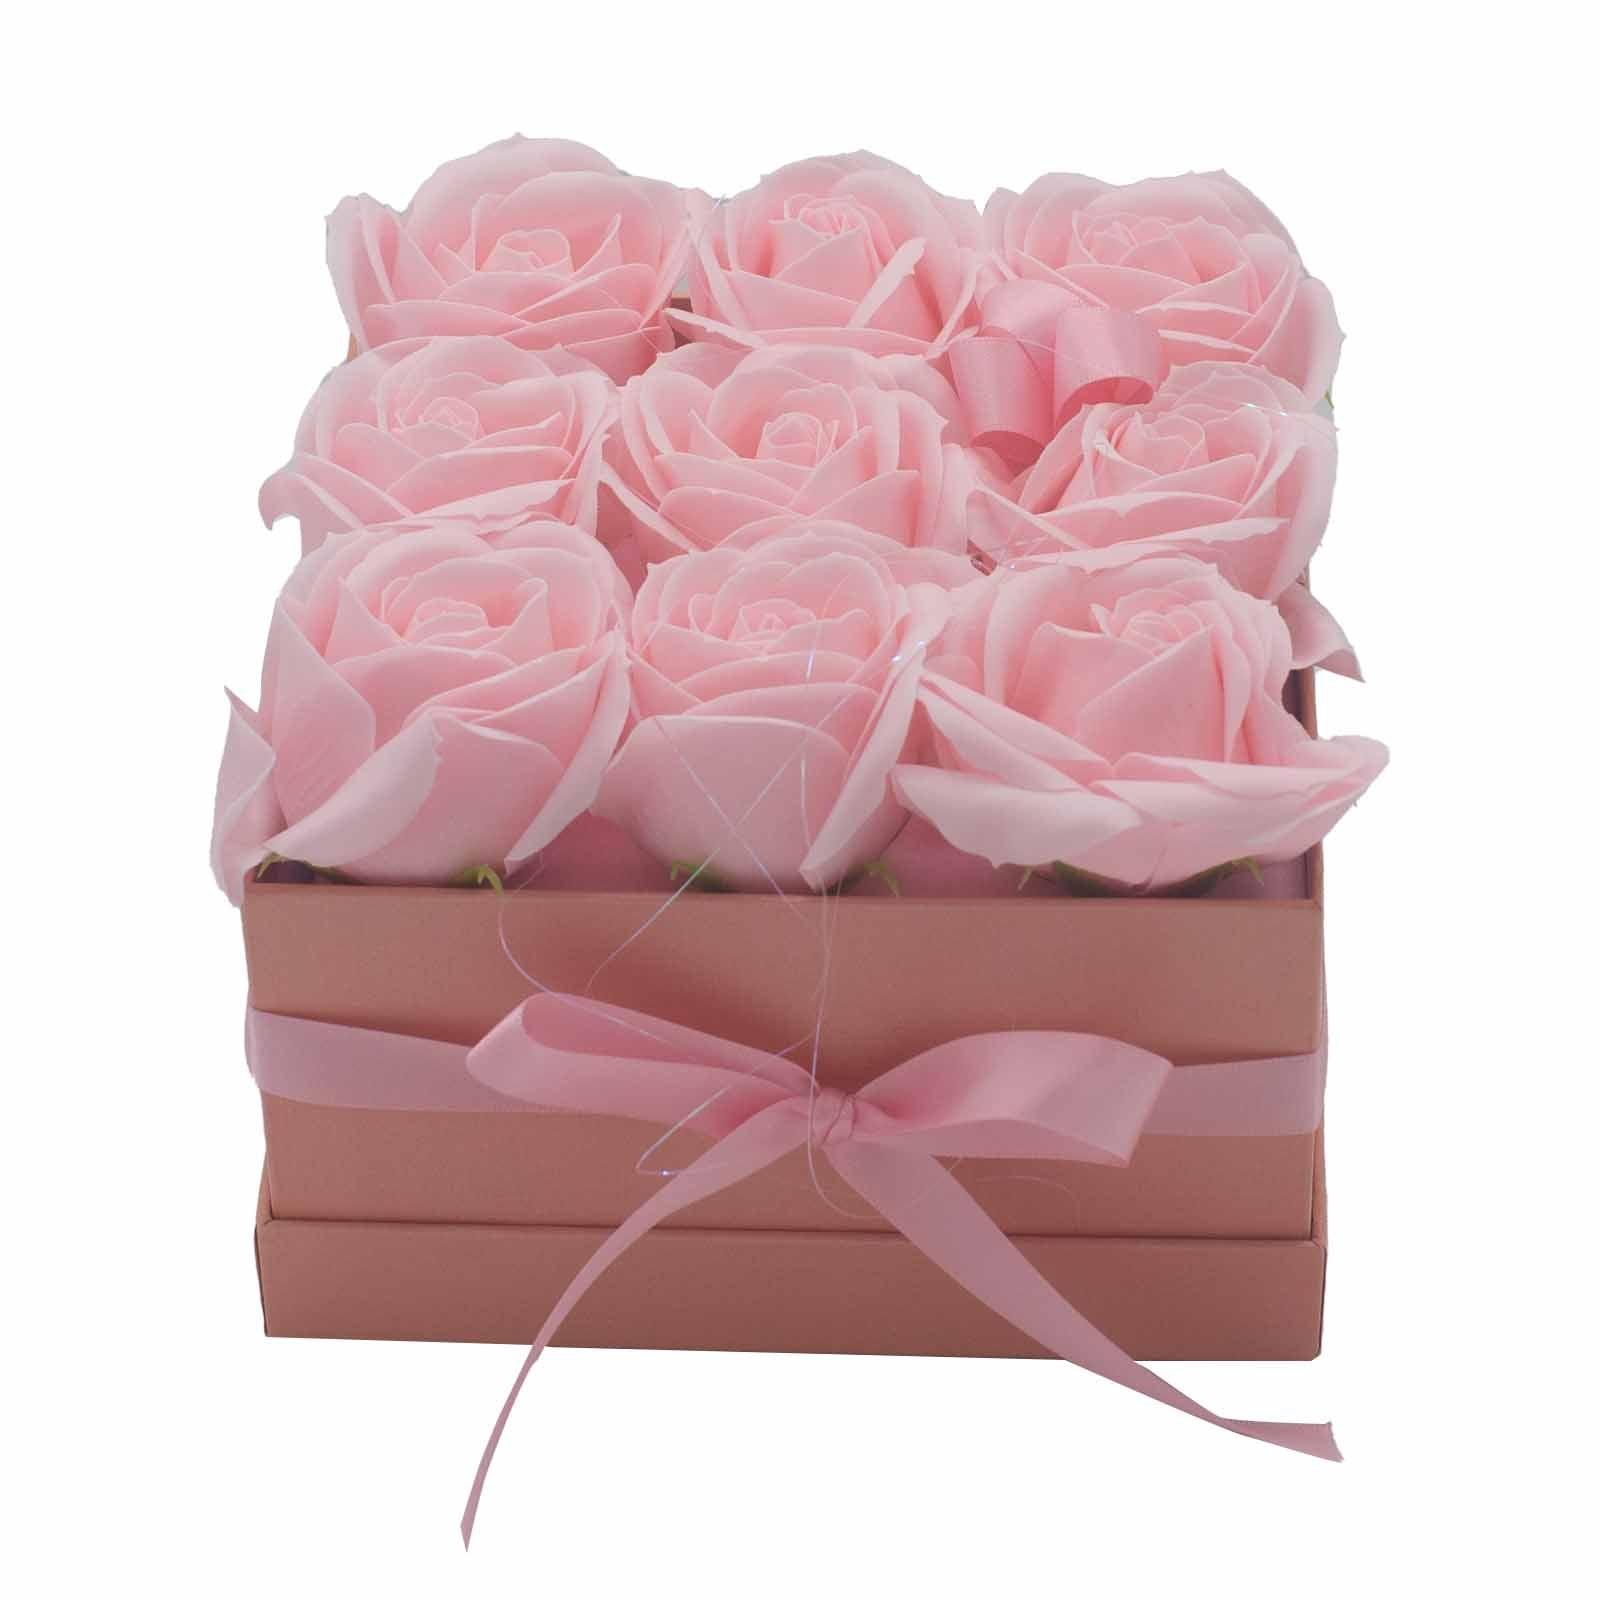 Soap Flower Gift Bouquet - 9 Pink Roses - Square - DuvetDay.co.uk